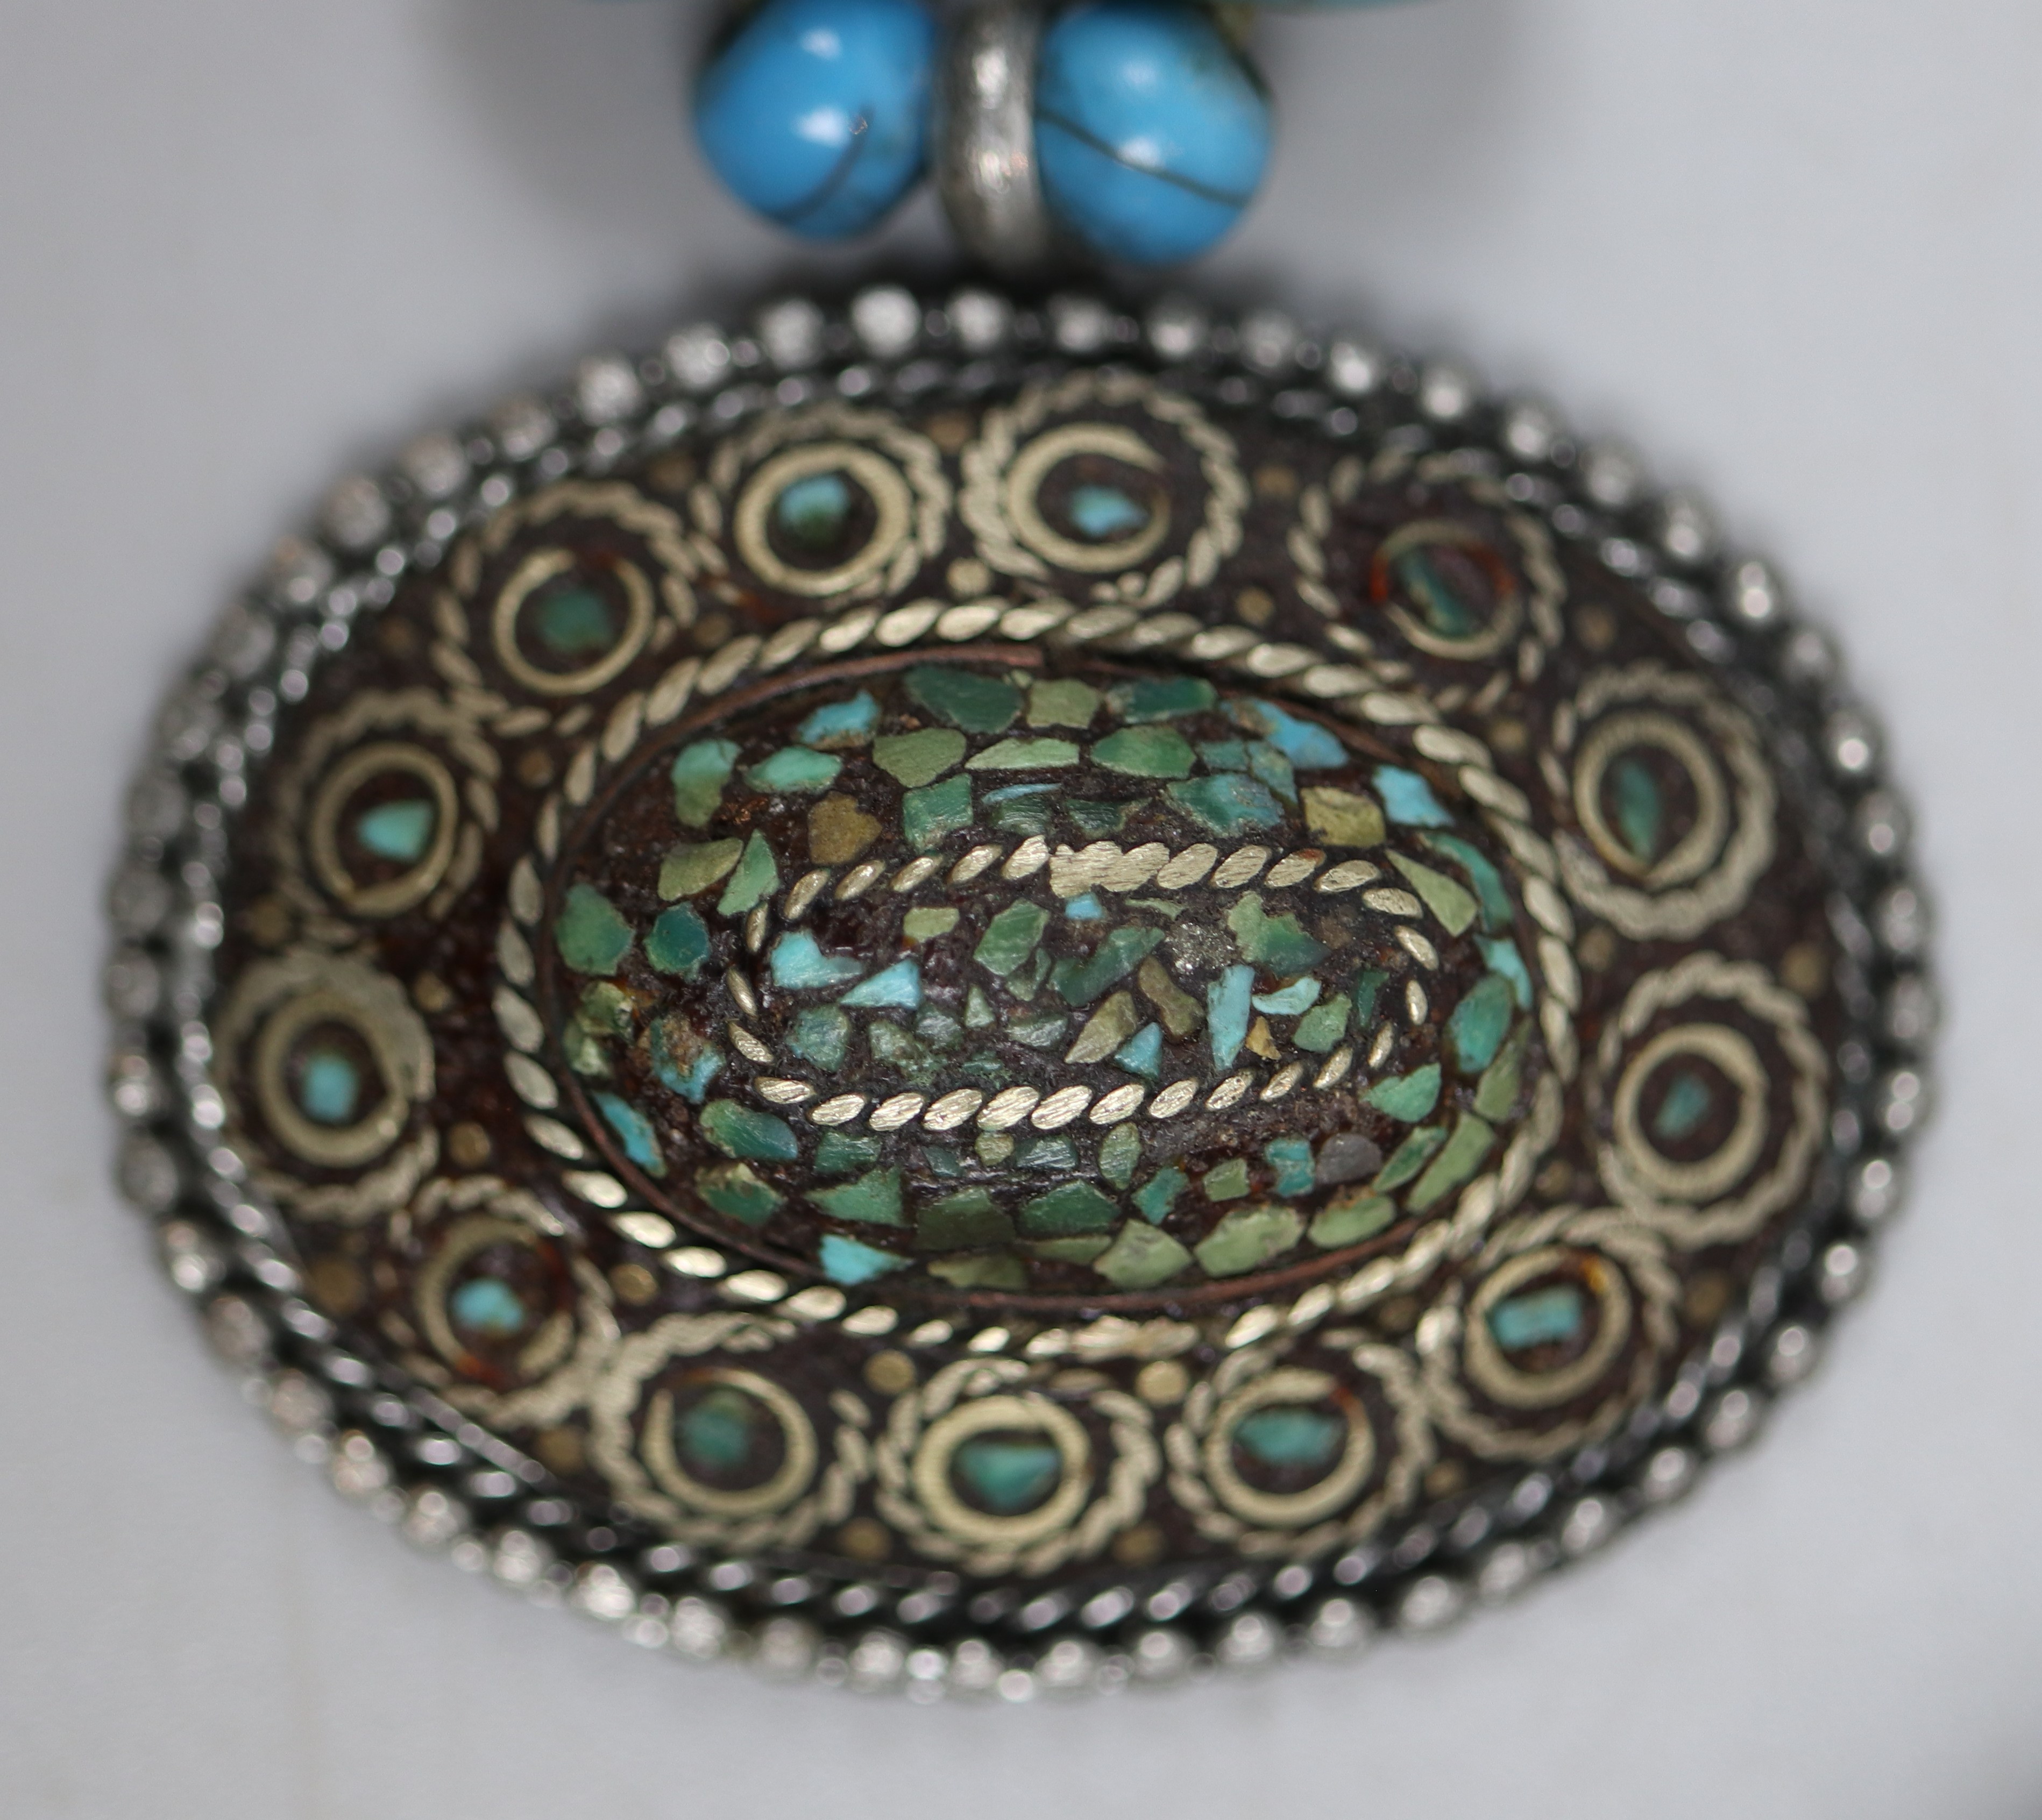 Vintage Himalayan / Tibet silver & turquoise necklaces - Image 2 of 7